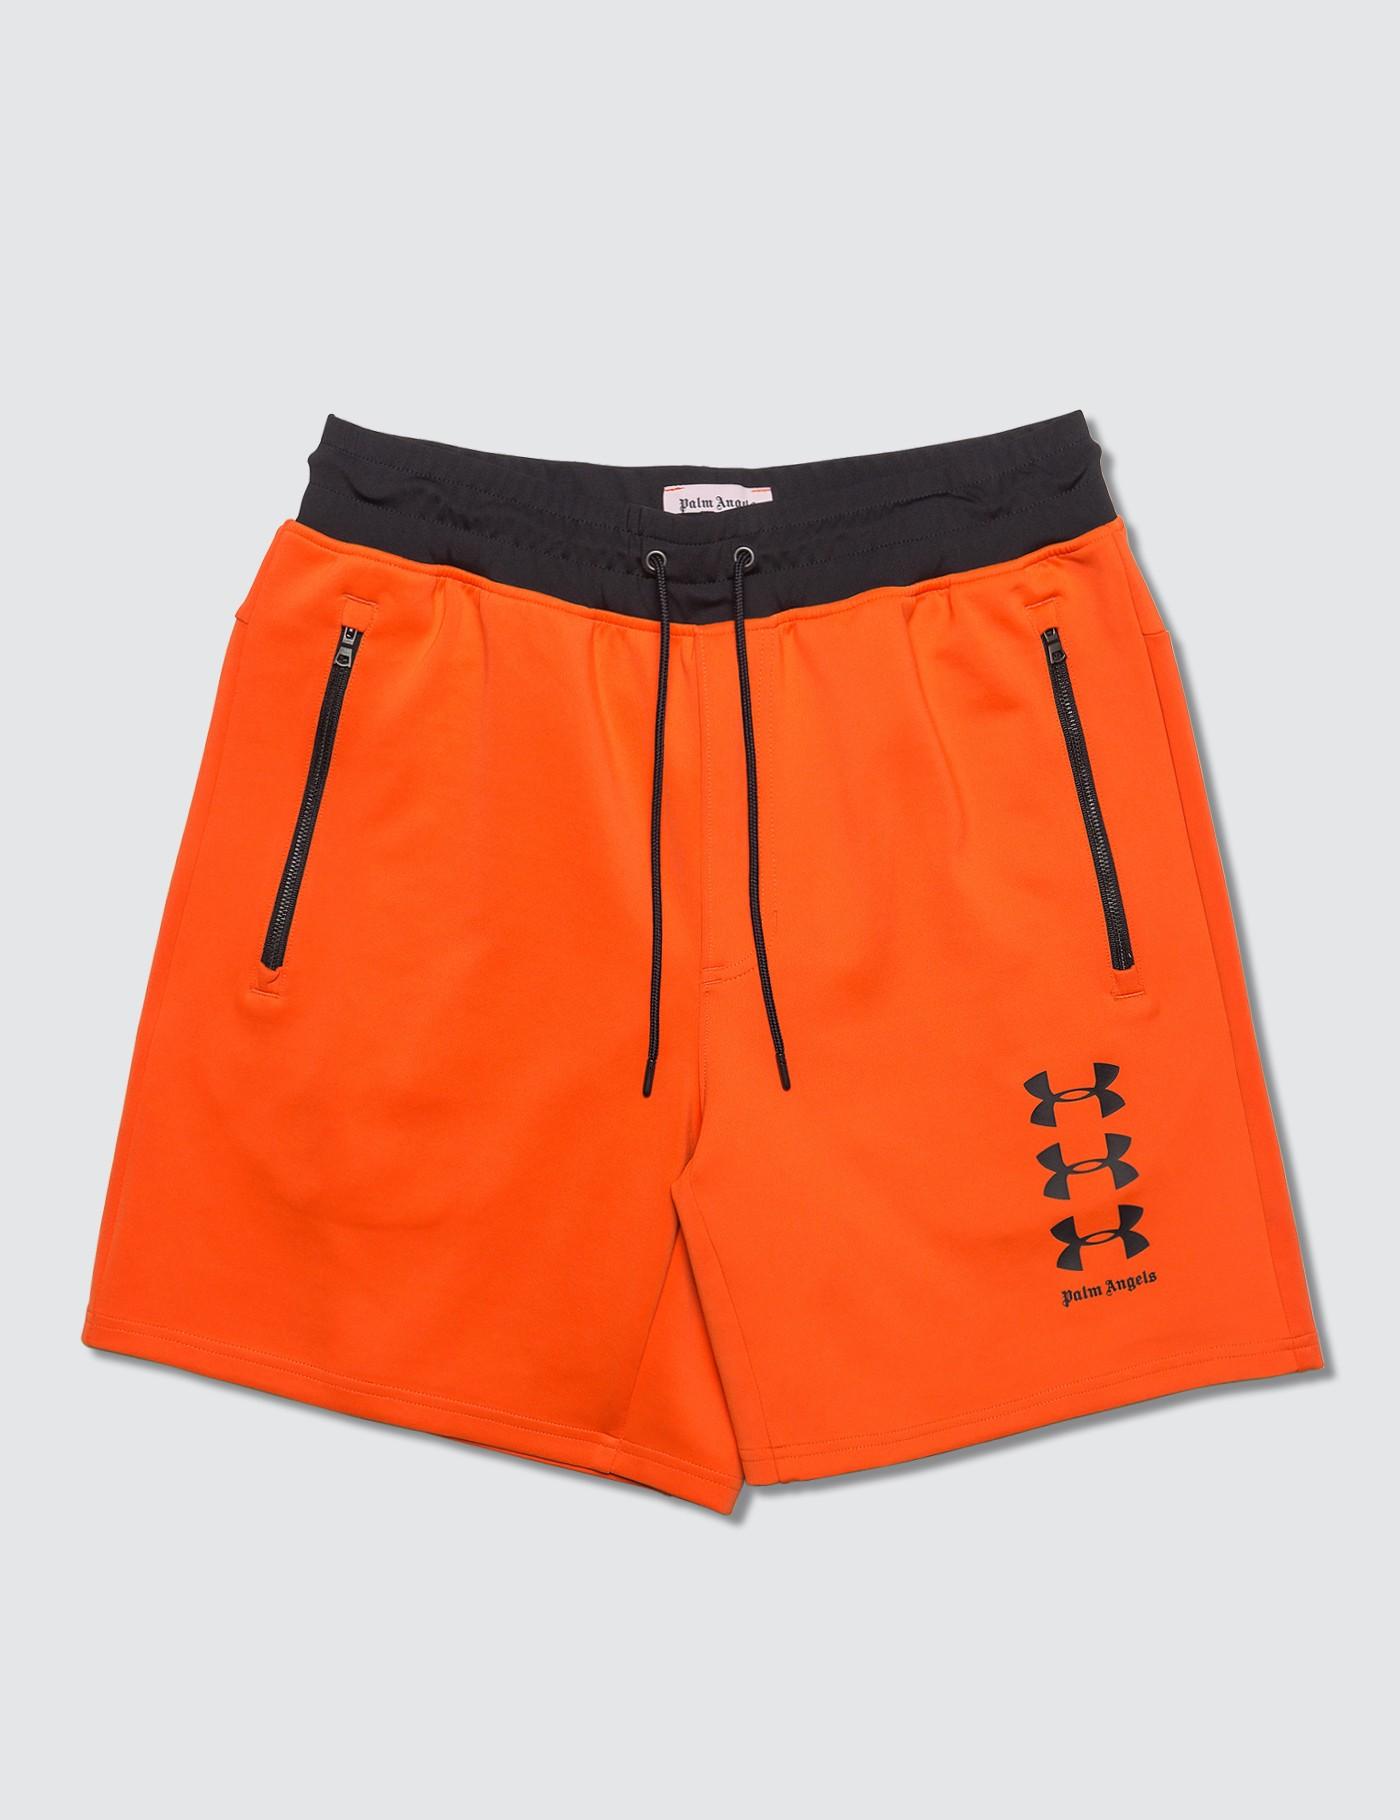 Palm Angels Synthetic Under Armour X Shorts in Orange for Men - Lyst